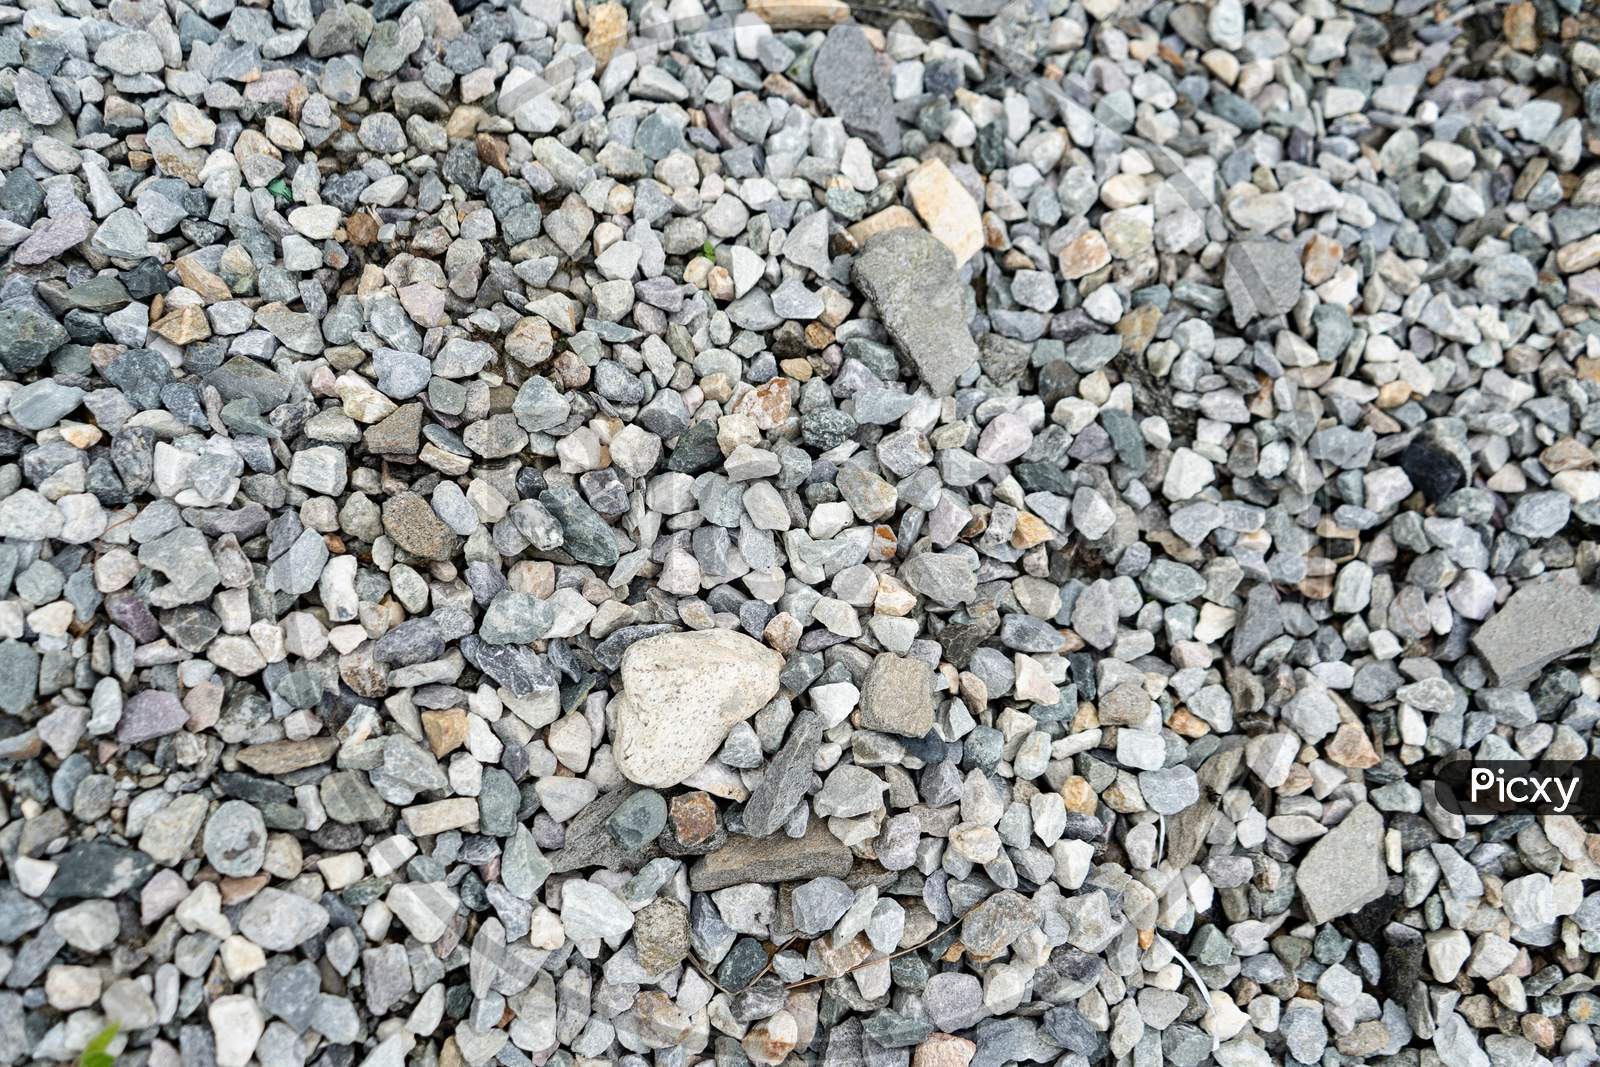 Abstract Design Formed By Various Numbers Of Pebbles Scattered In The Lawn, Background Texture Of Pebbles.